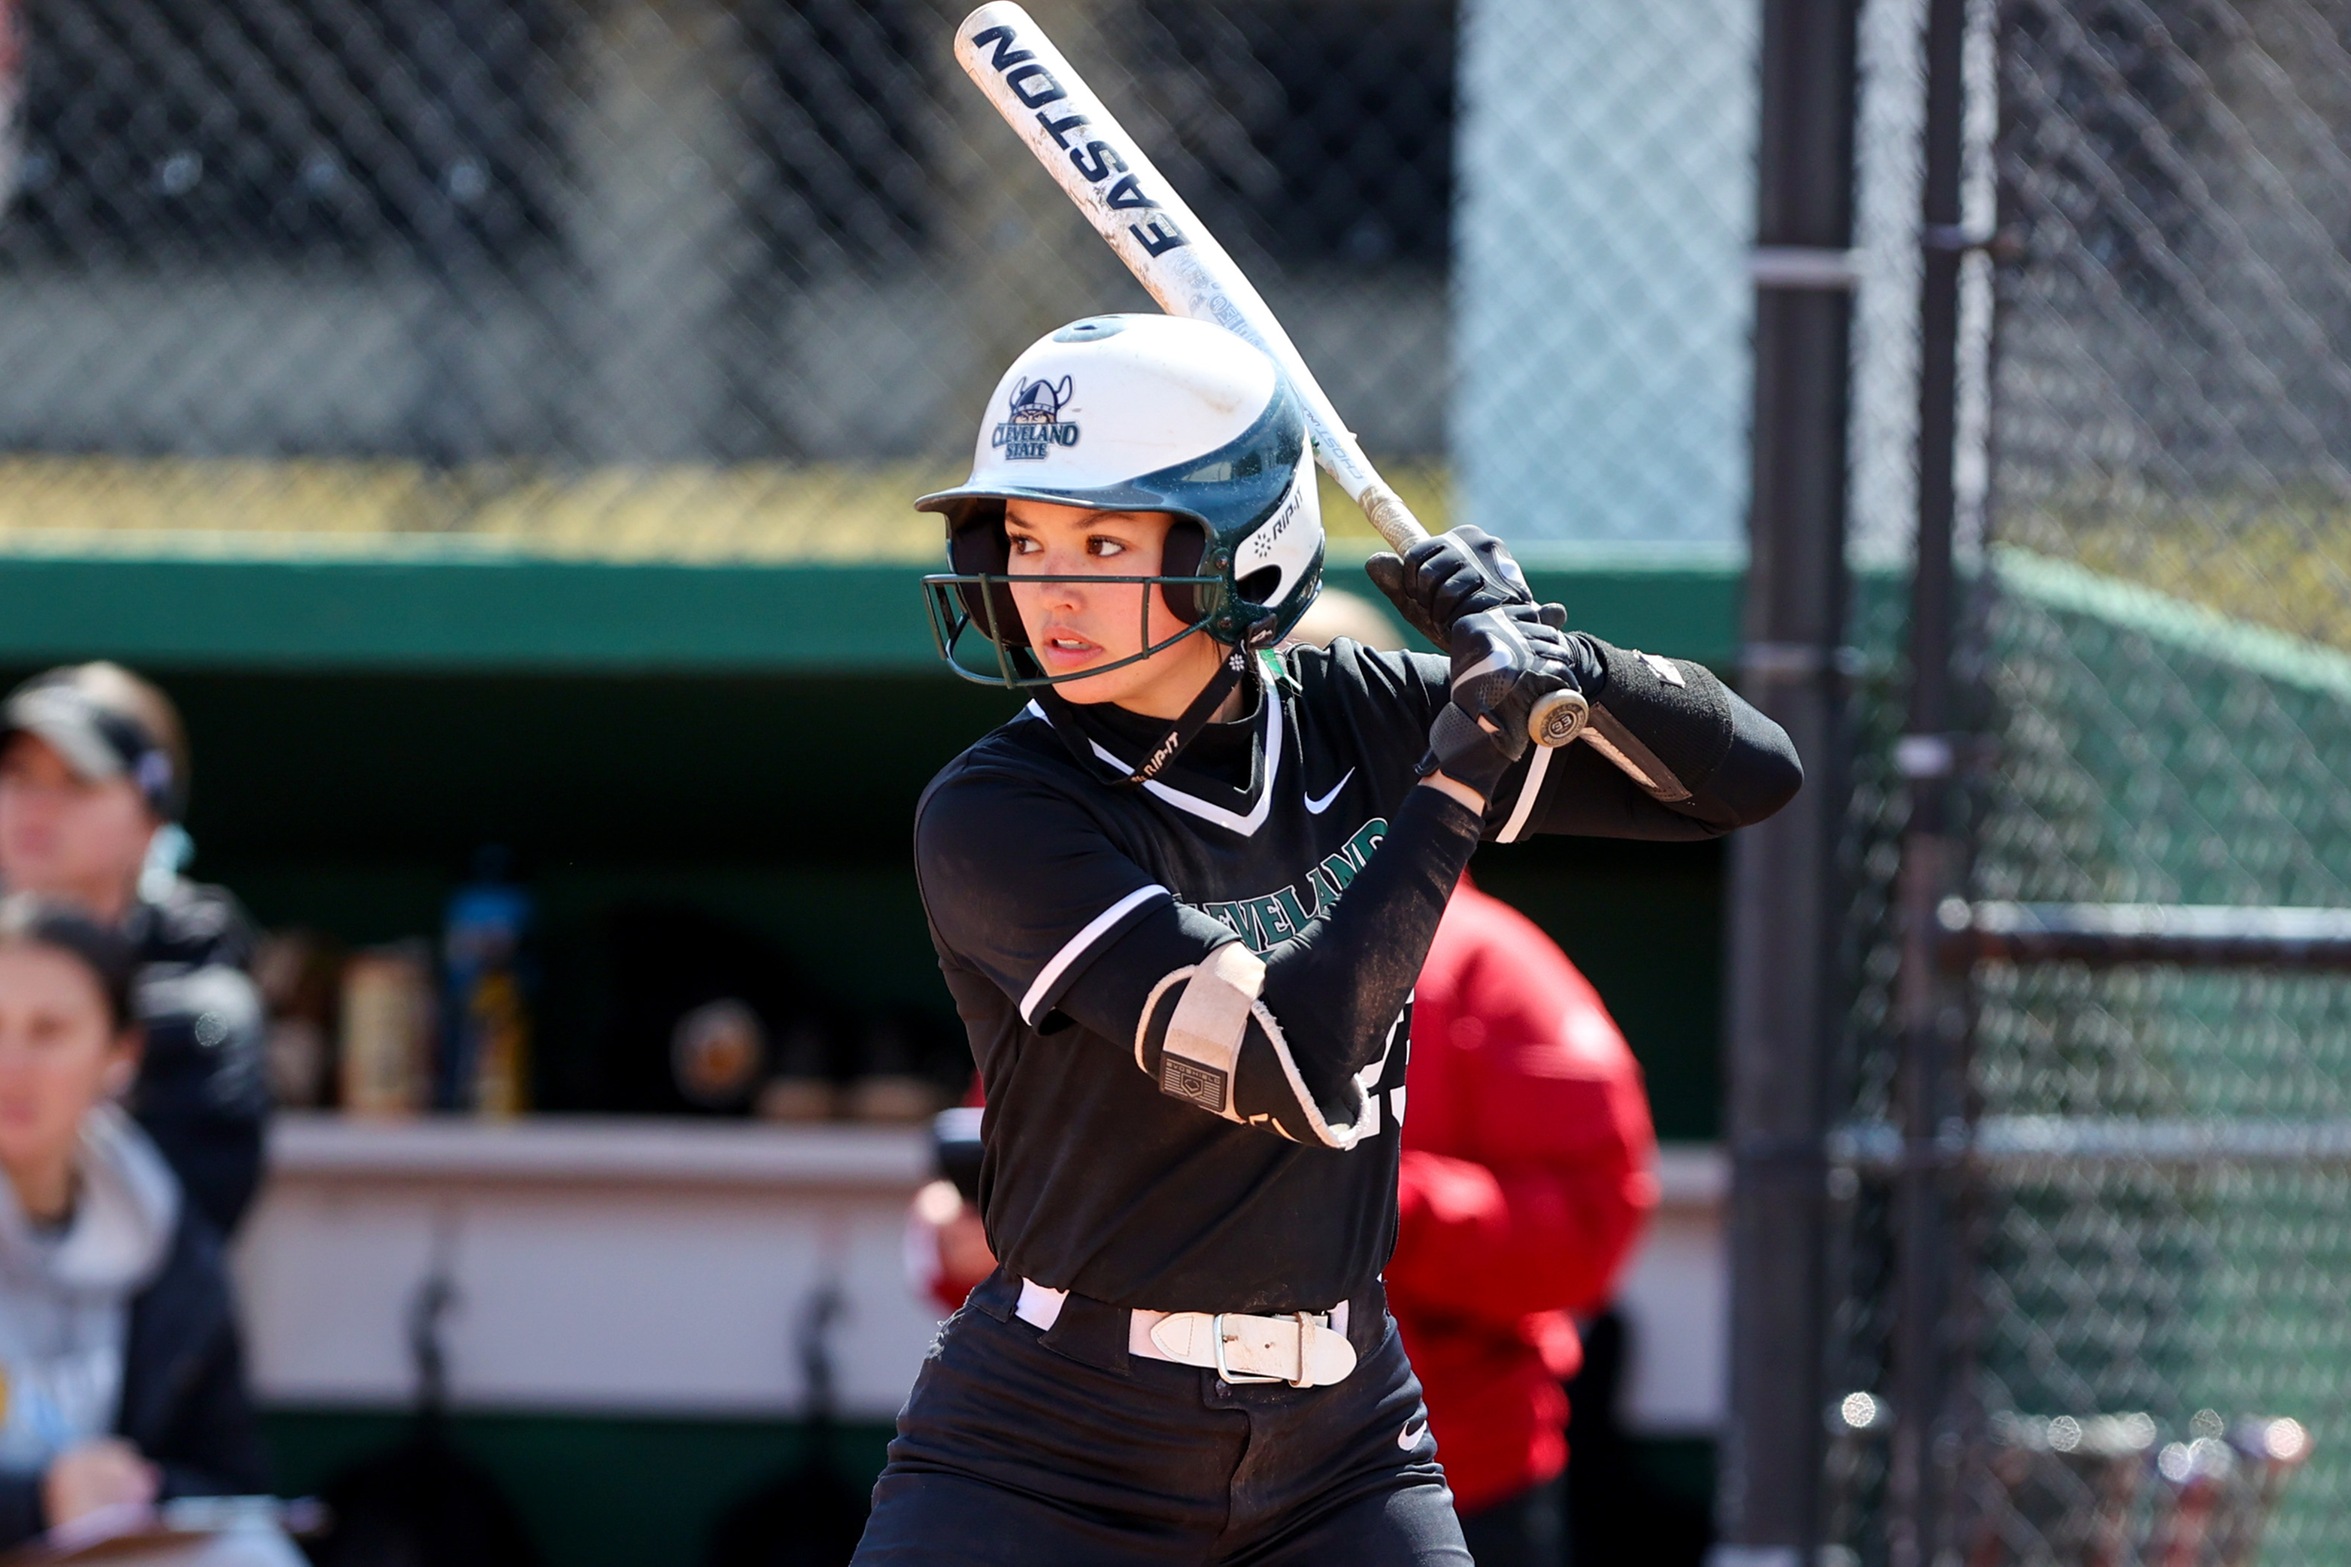 Cleveland State Softball Completes Weekend Sweep with Doubleheader Victories